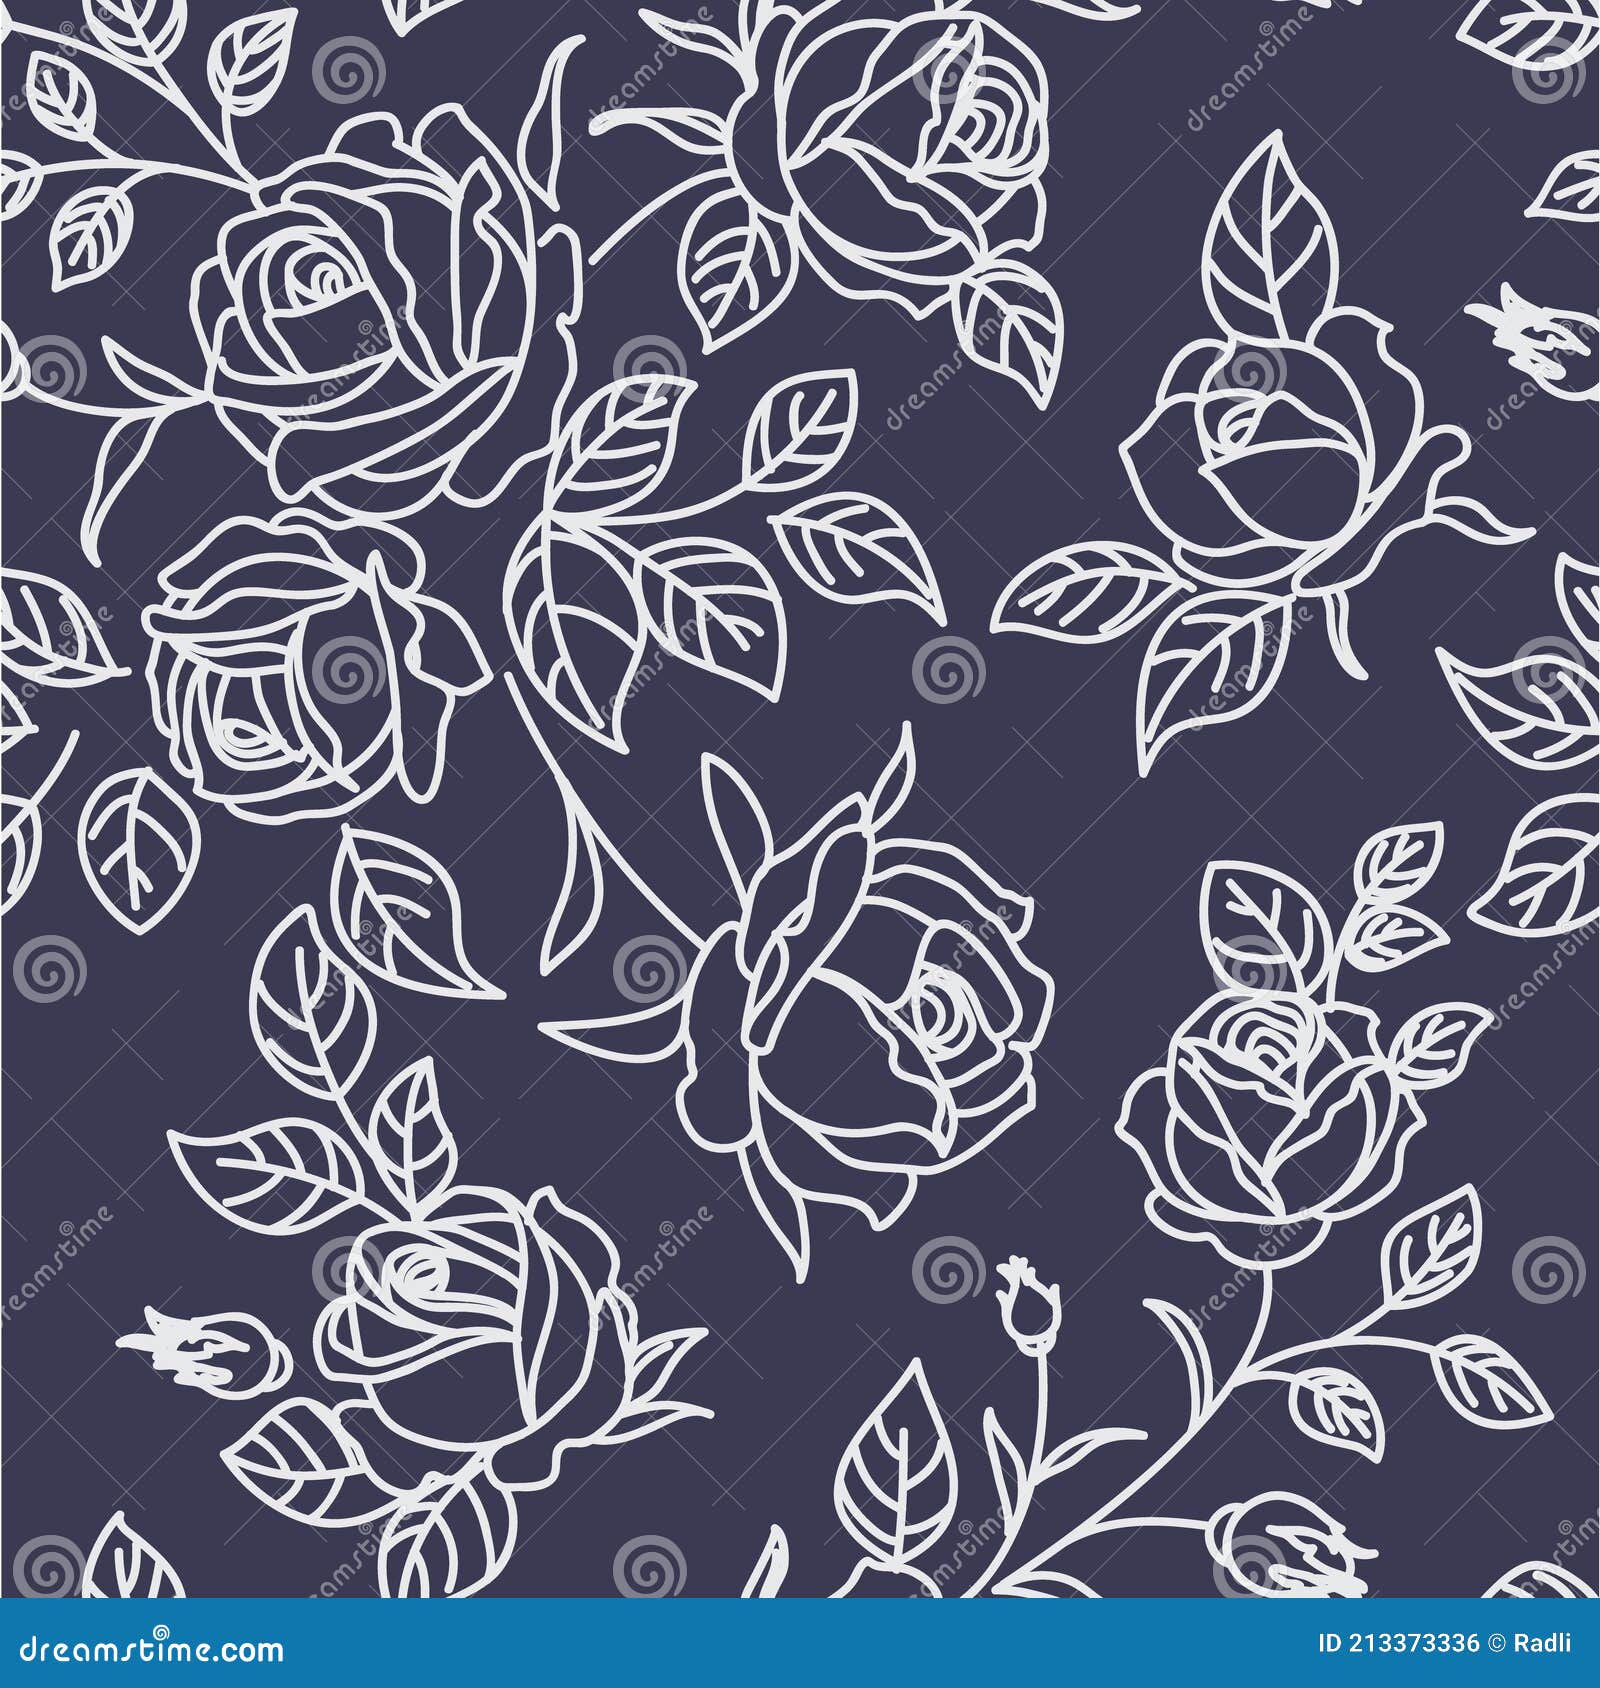 Seamless pattern with abstract garden roses, with buds and leaves silhouette. Black background with blossoming outline flowers. Vintage floral hand drawn wallpaper. Vector stock illustration